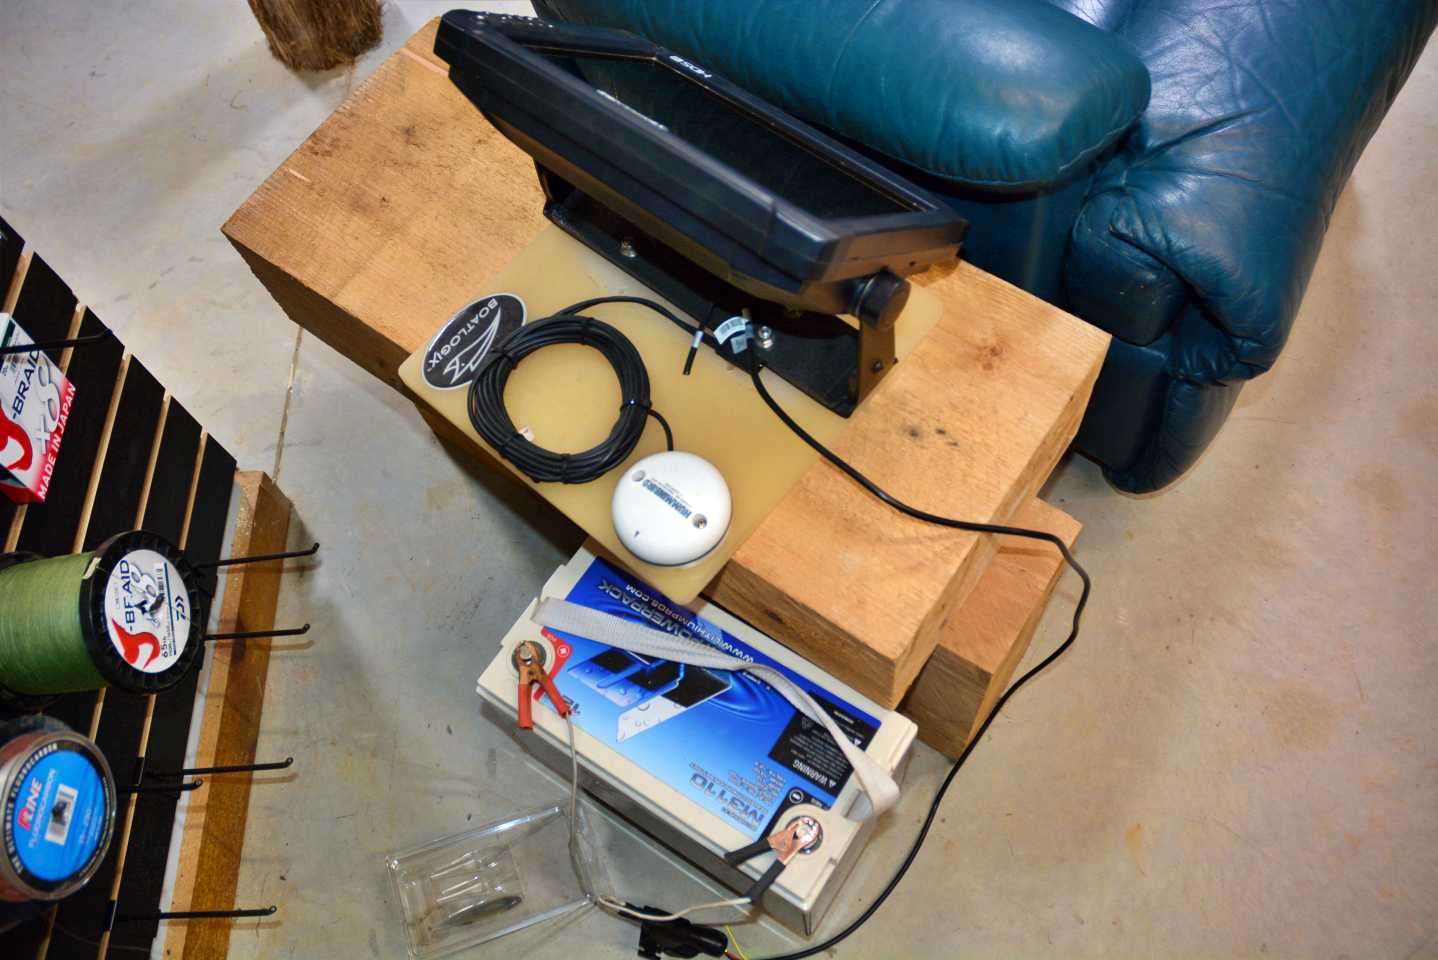 Beside the chair is a Lithium Pros battery and Lowrance unit and receiver. âI work on waypoint management while Iâm watching reruns of Bassmaster LIVE.â Gross unmounts a unit from the boat, brings it here, hooks it up and goes to work.